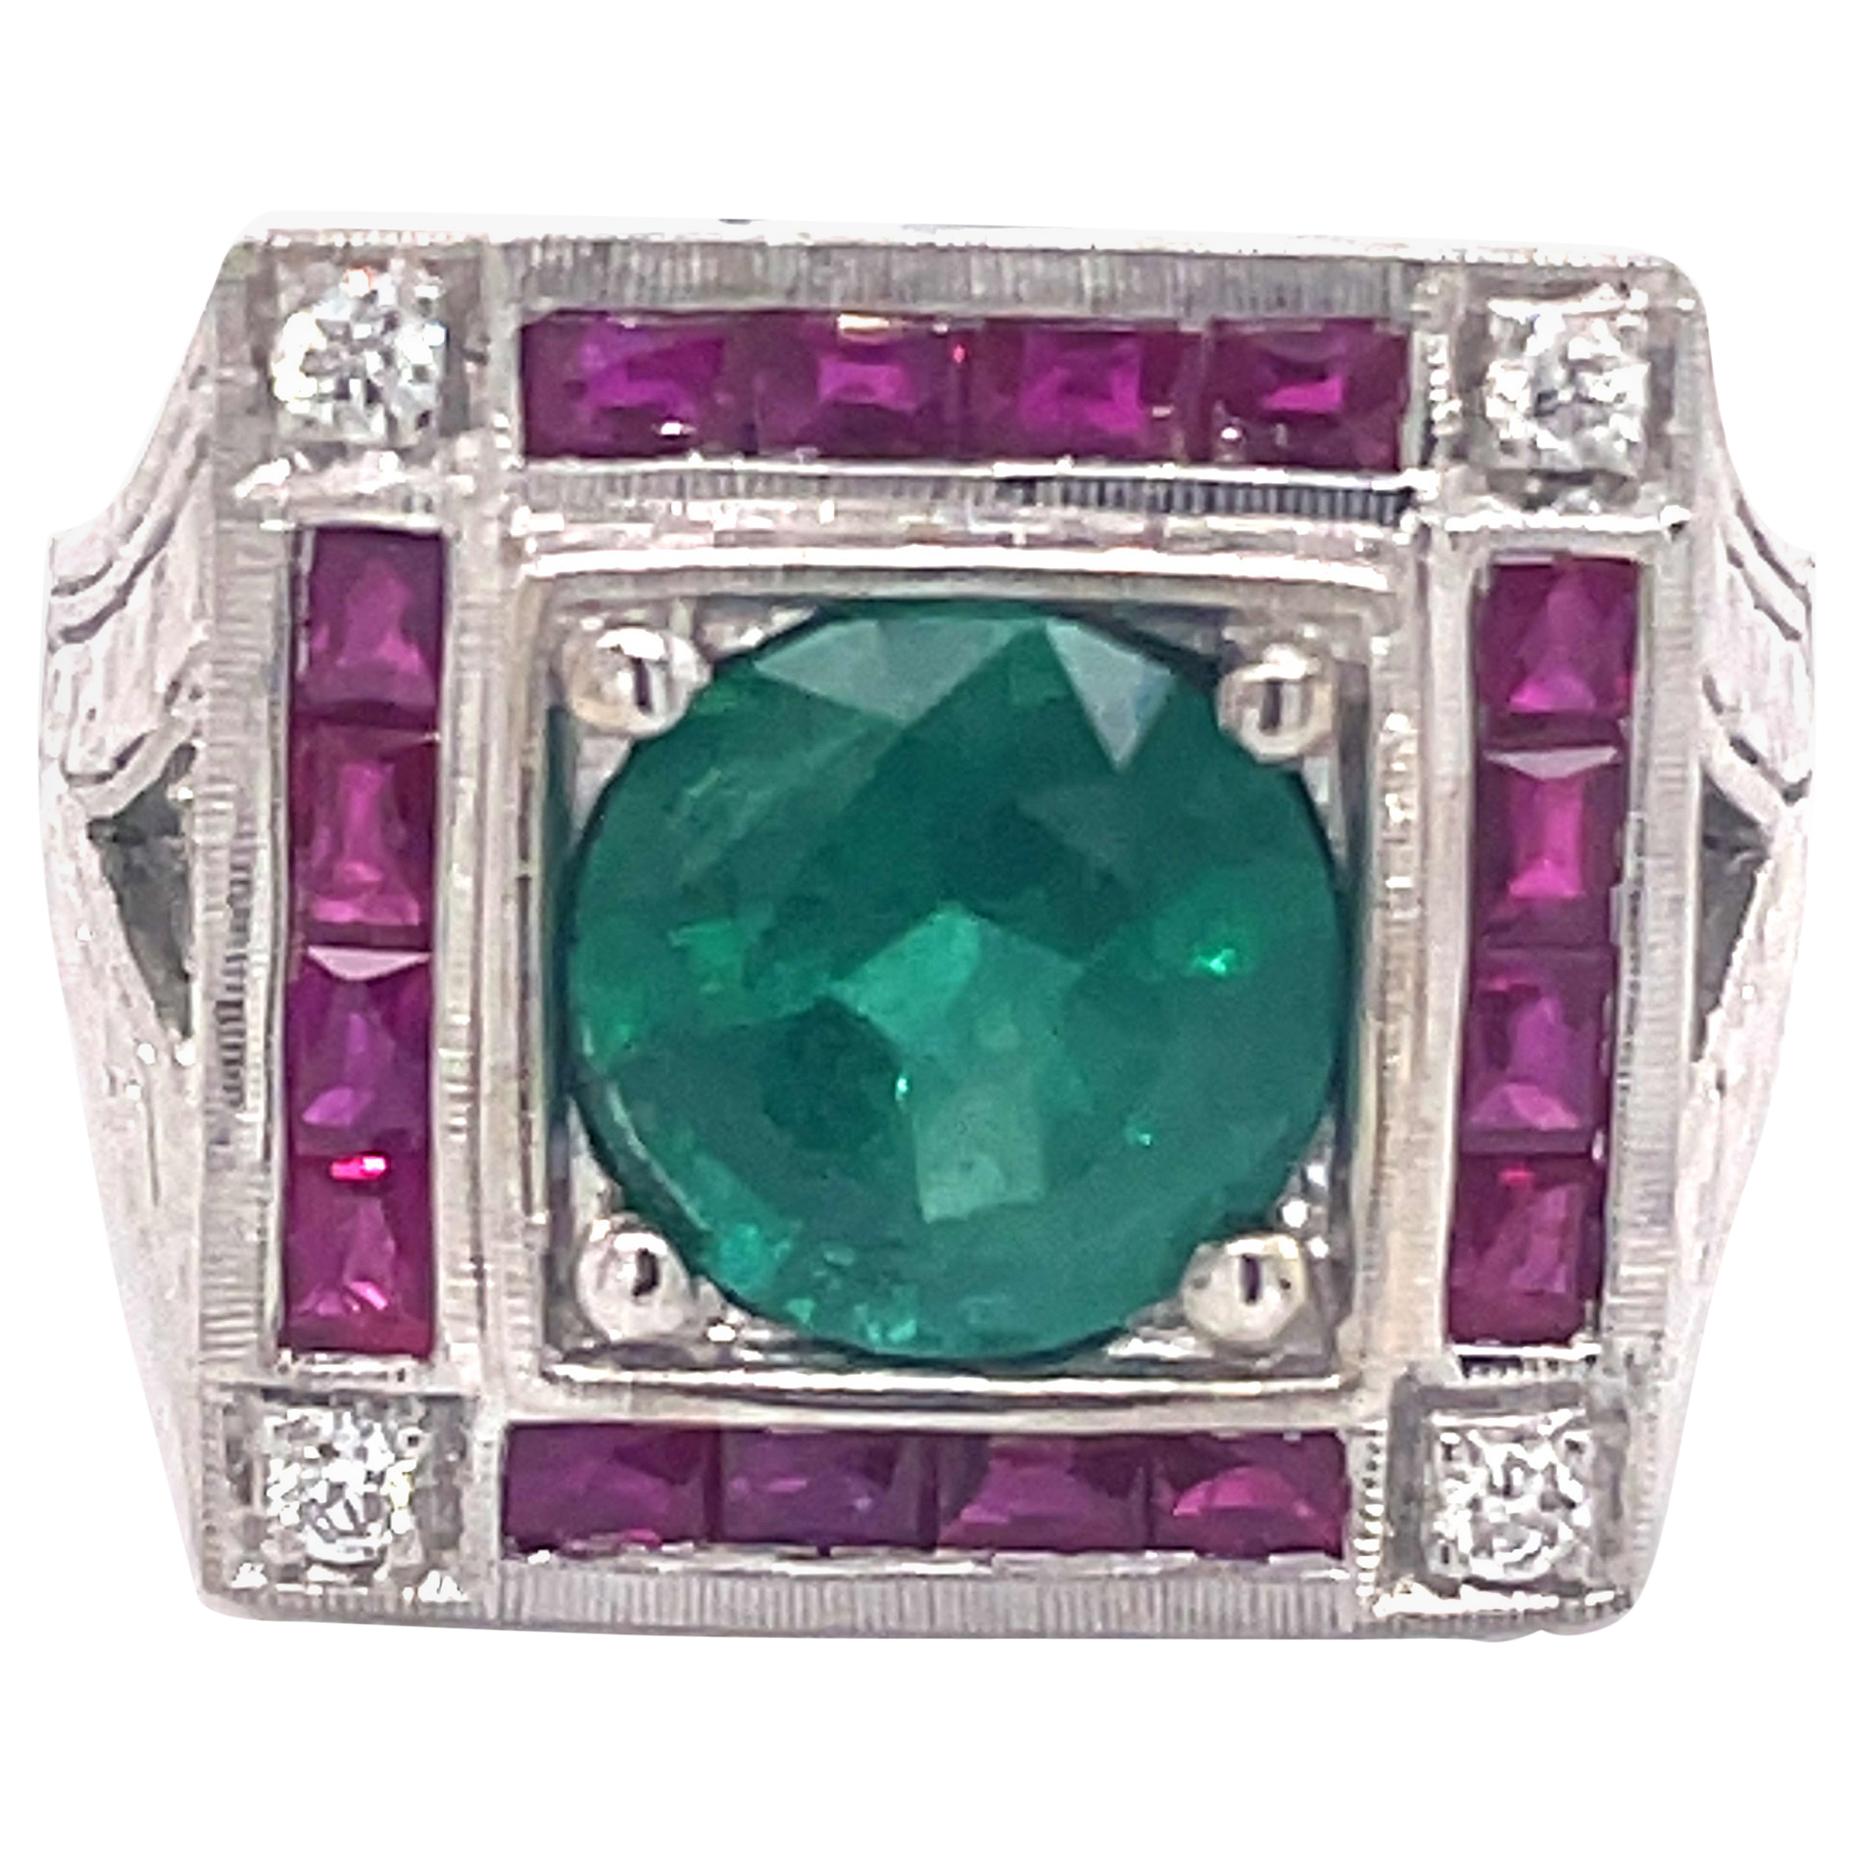 Art Deco Style 2.15 Carat Emerald with Rubies & Diamonds Ring 18k White Gold